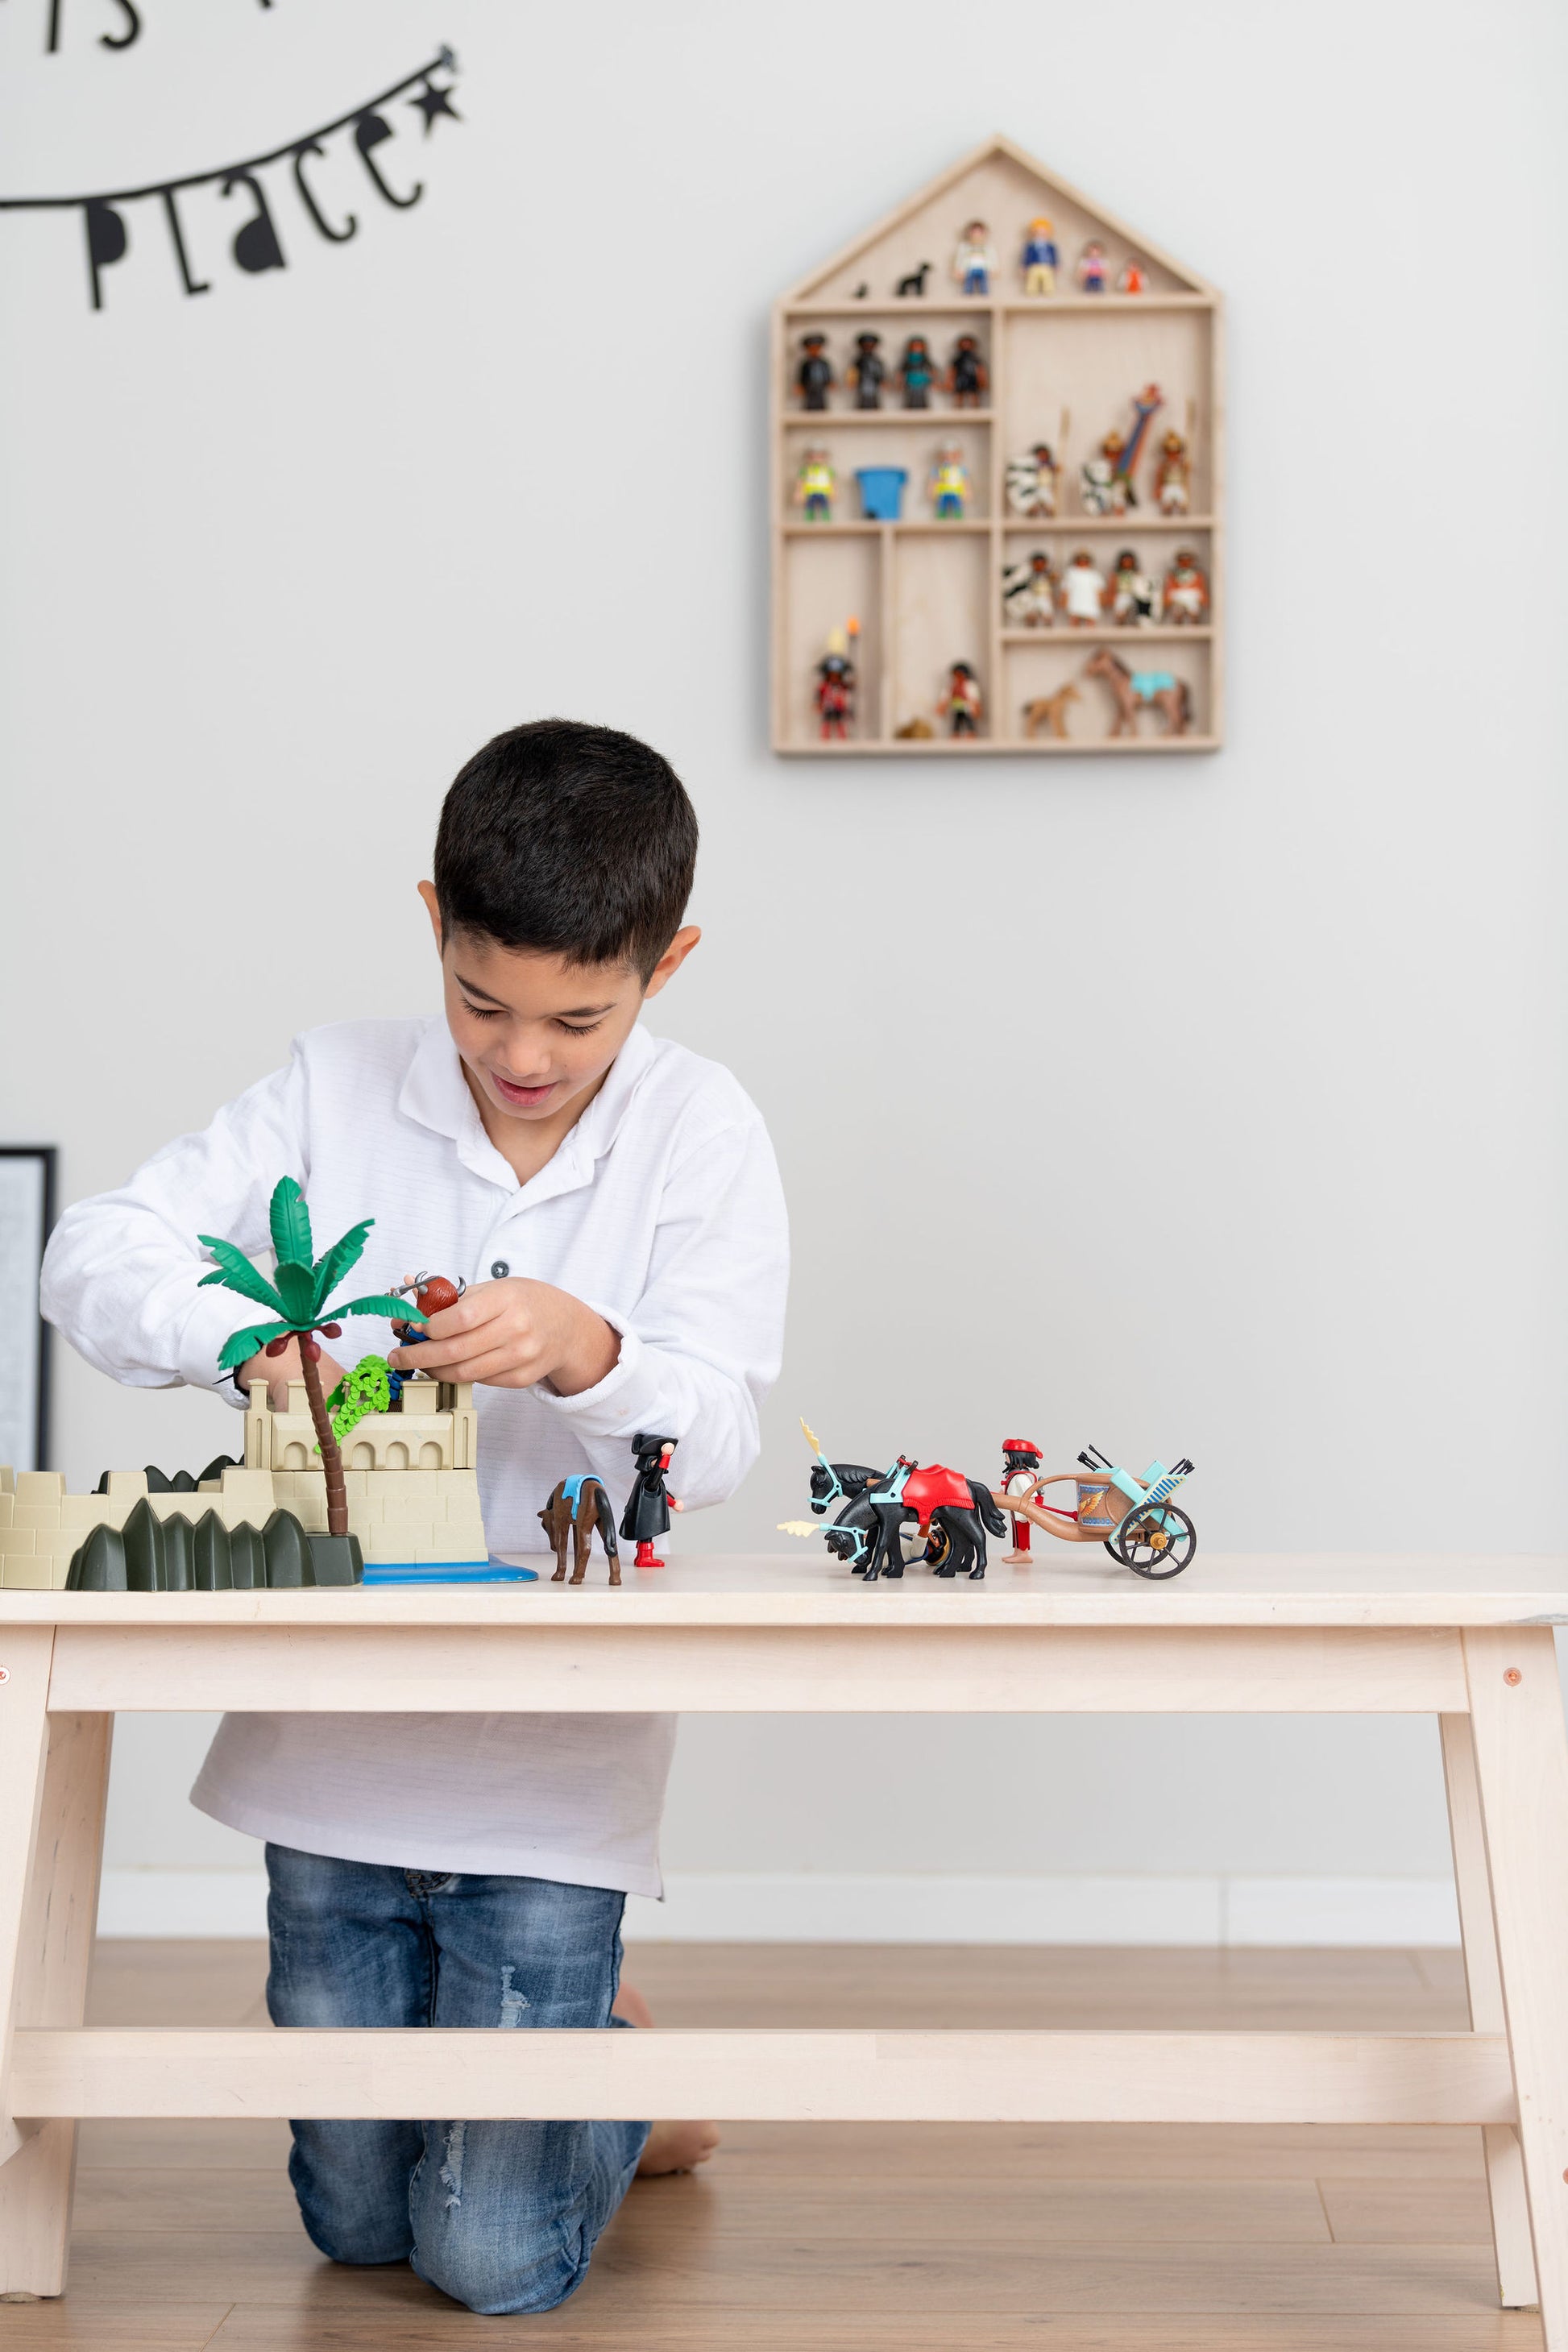 A boy sits near a bench and plays with Playmobil near a house-shaped toy display shelf that is hung on the wall